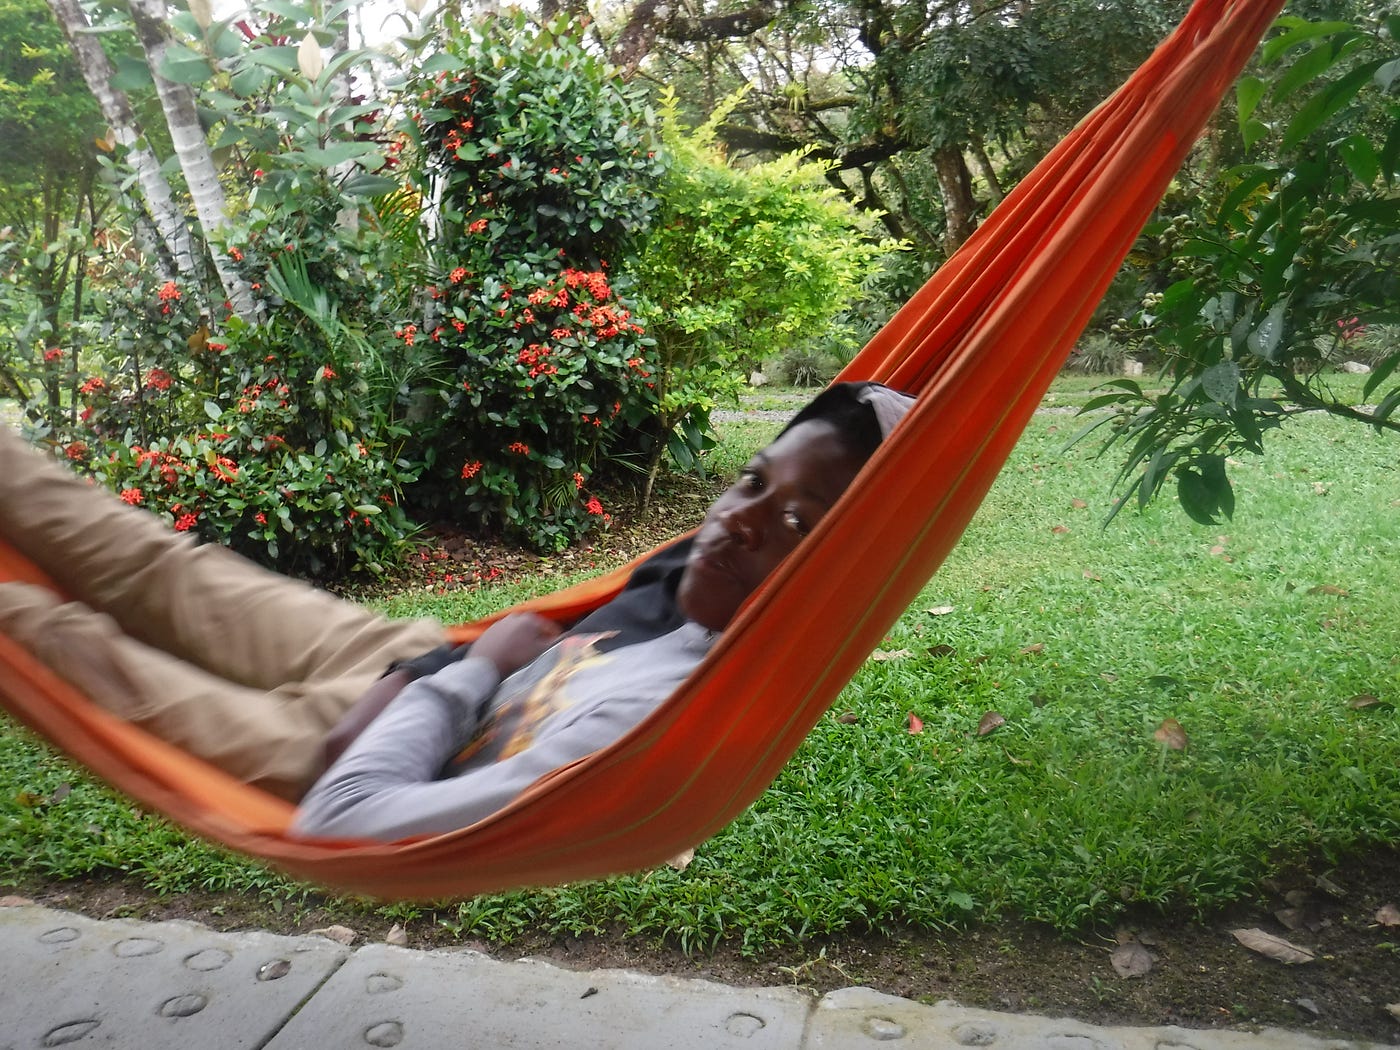 Author’s teen-aged son lounges in a bright orange hammock surrounded by tropical greenery.